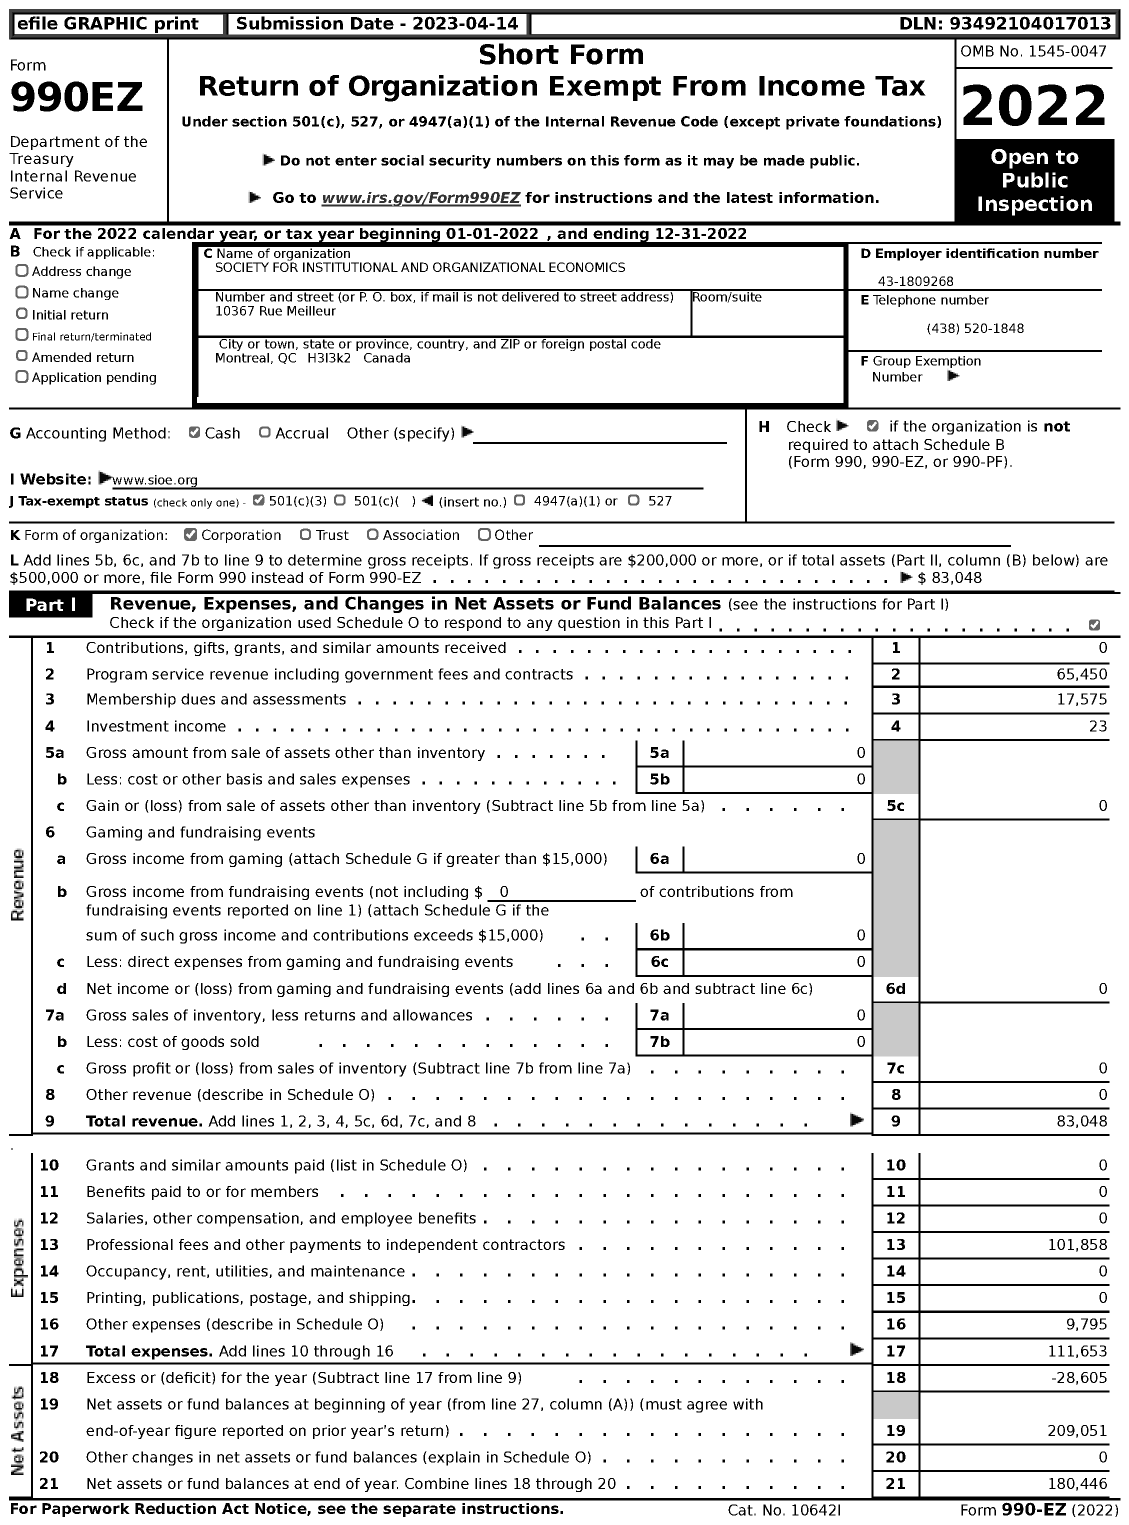 Image of first page of 2022 Form 990EZ for Society for Institutional and Organizational Economics